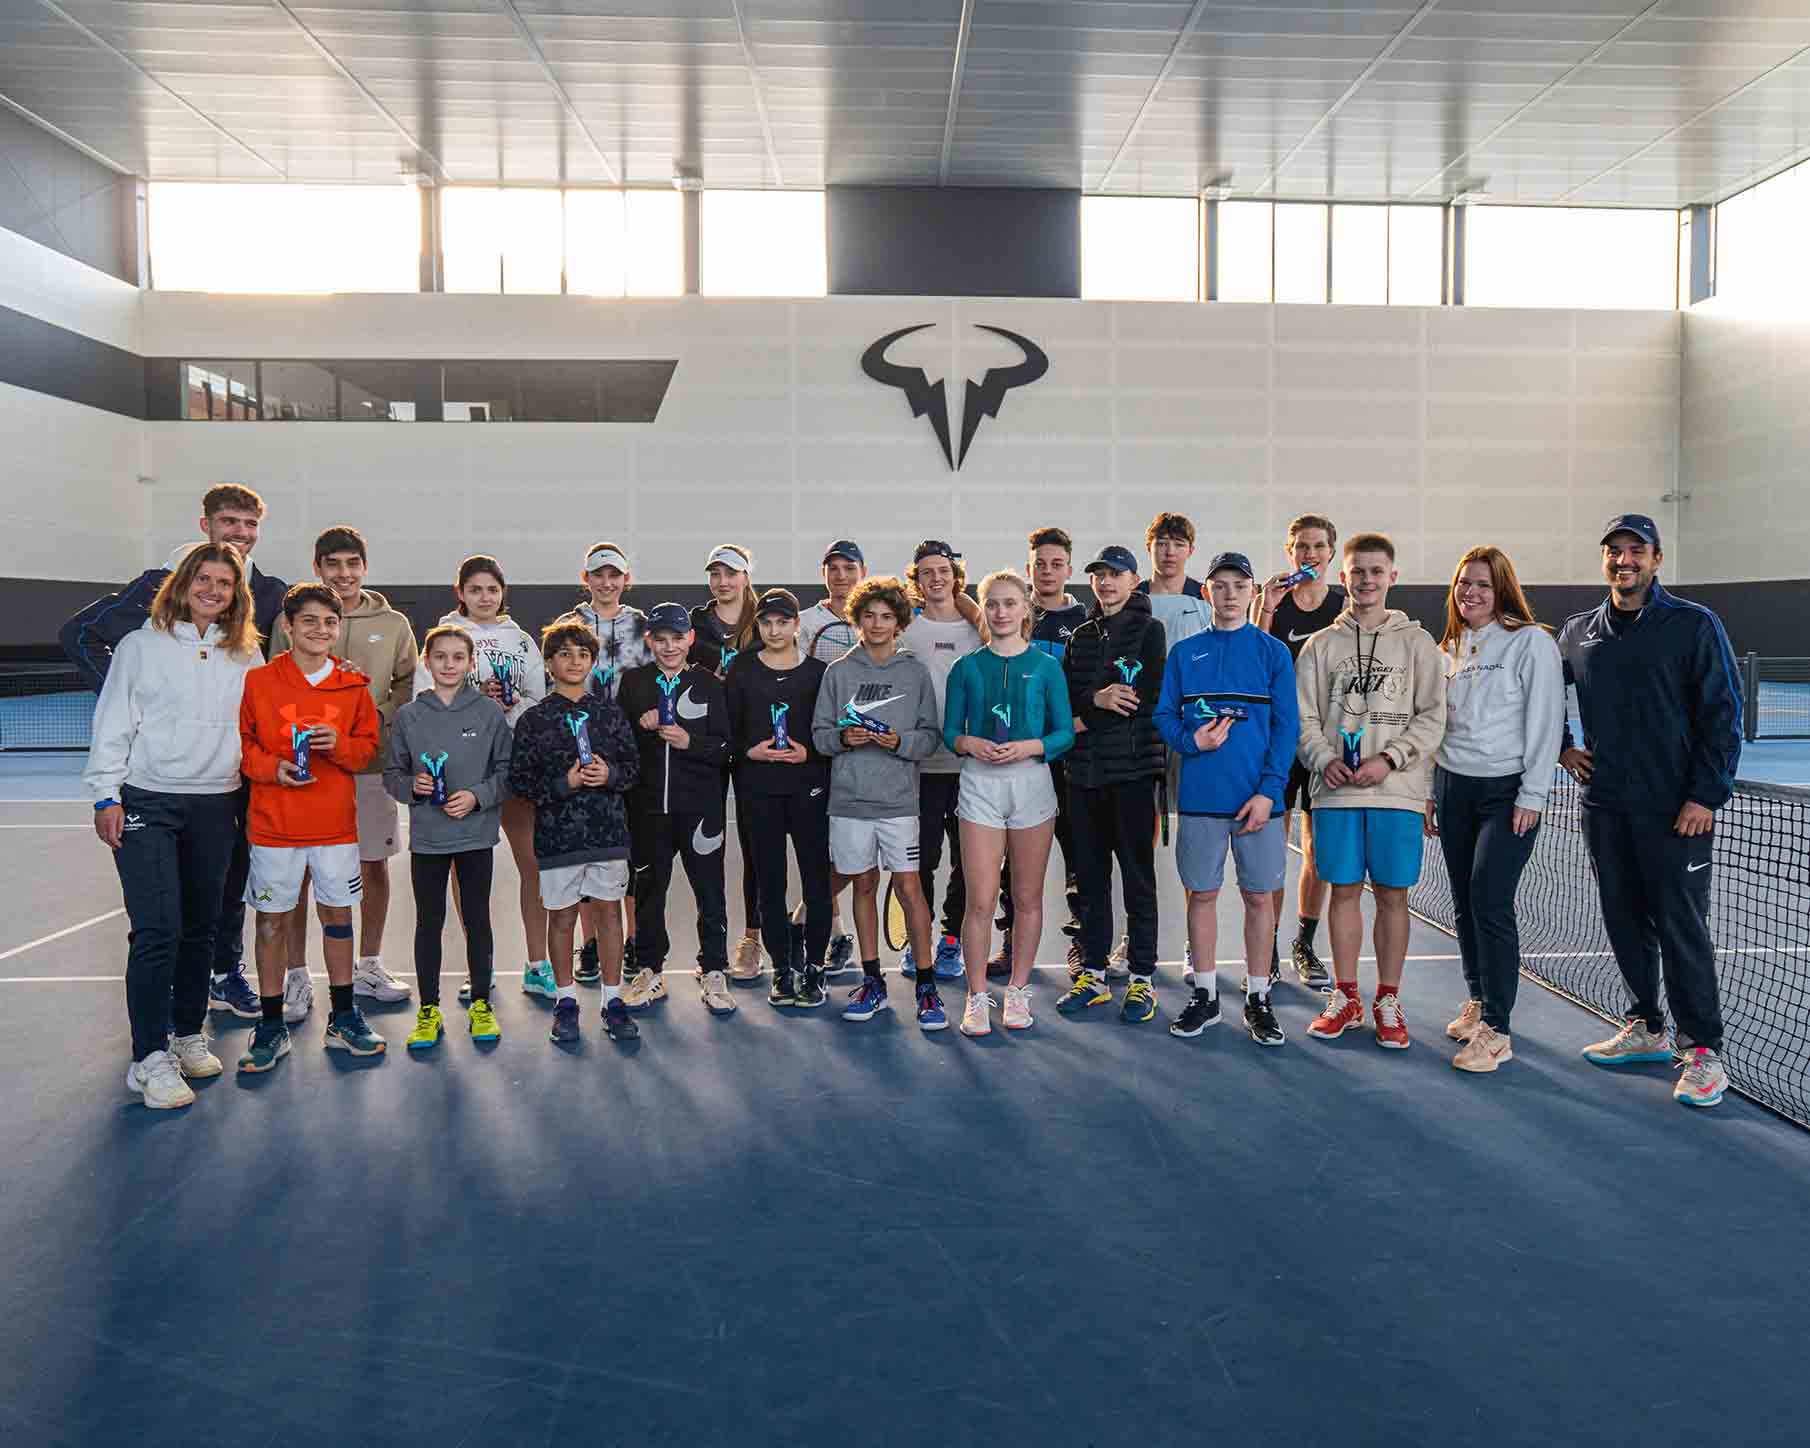 The Rafa Nadal Academy by Movistar continues its support of young Ukrainian tennis players